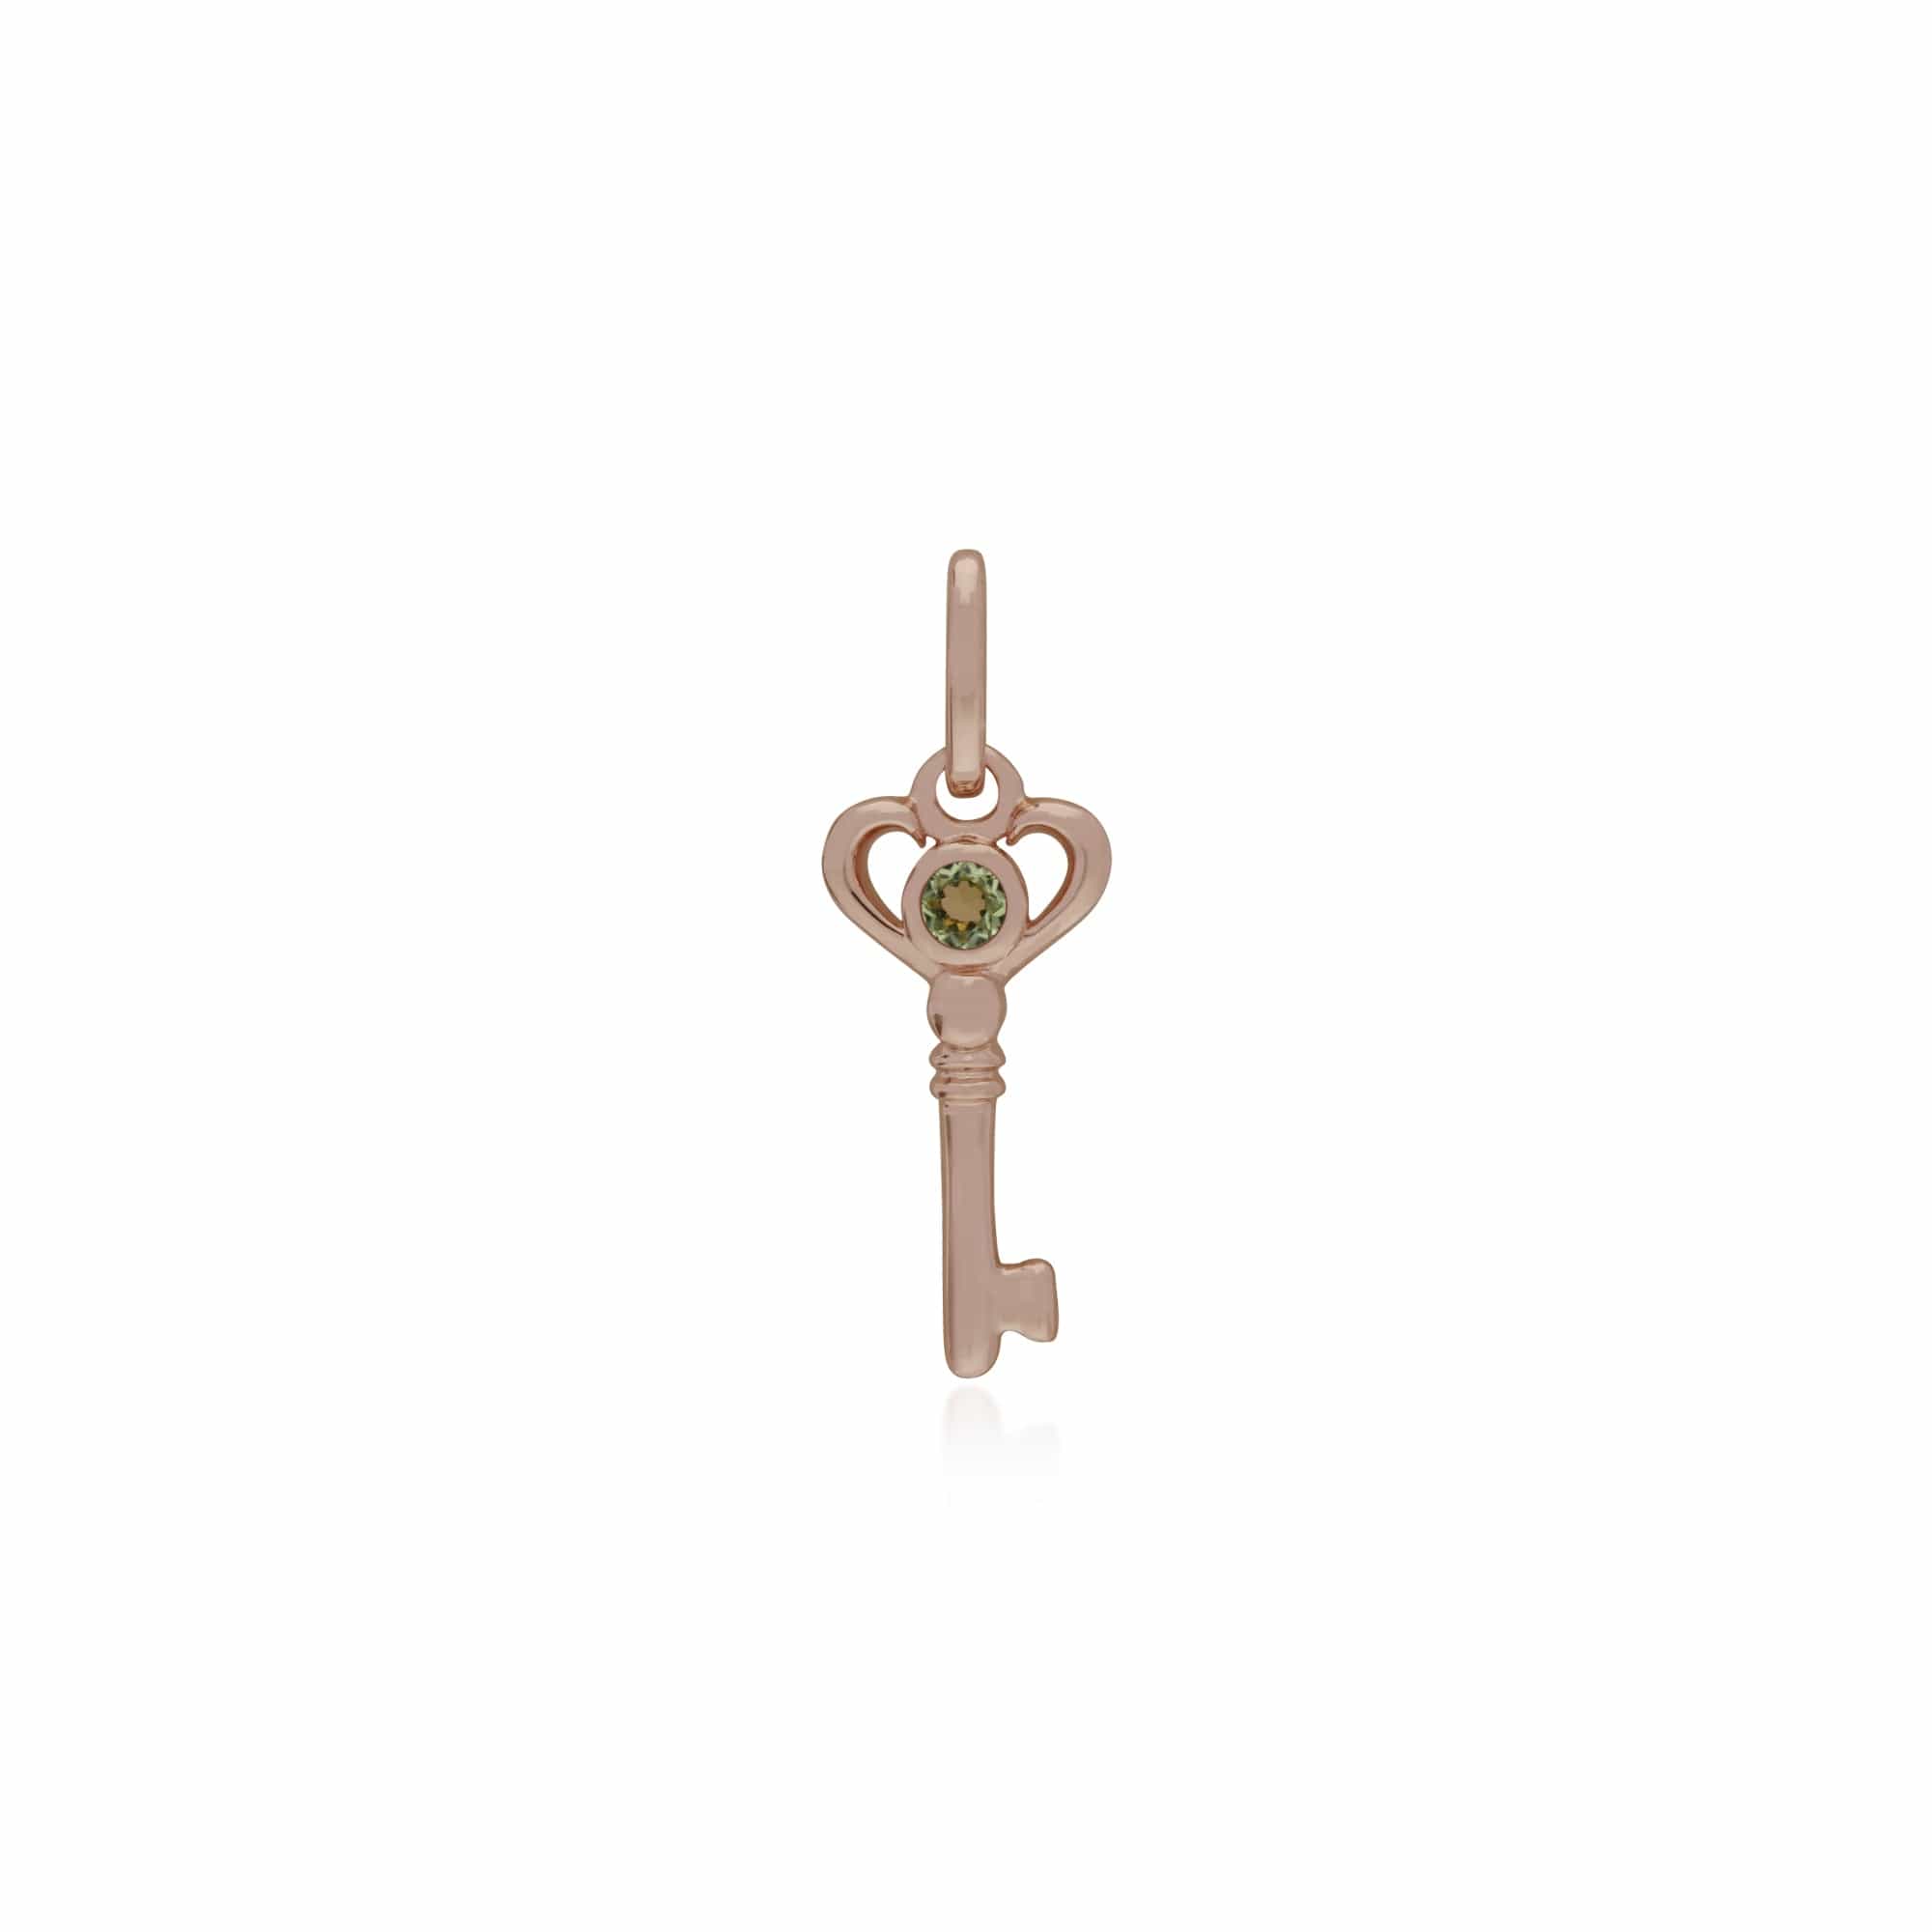 270P026307925-270P026901925 Classic Heart Lock Pendant & Peridot Key Charm in Rose Gold Plated 925 Sterling Silver 2